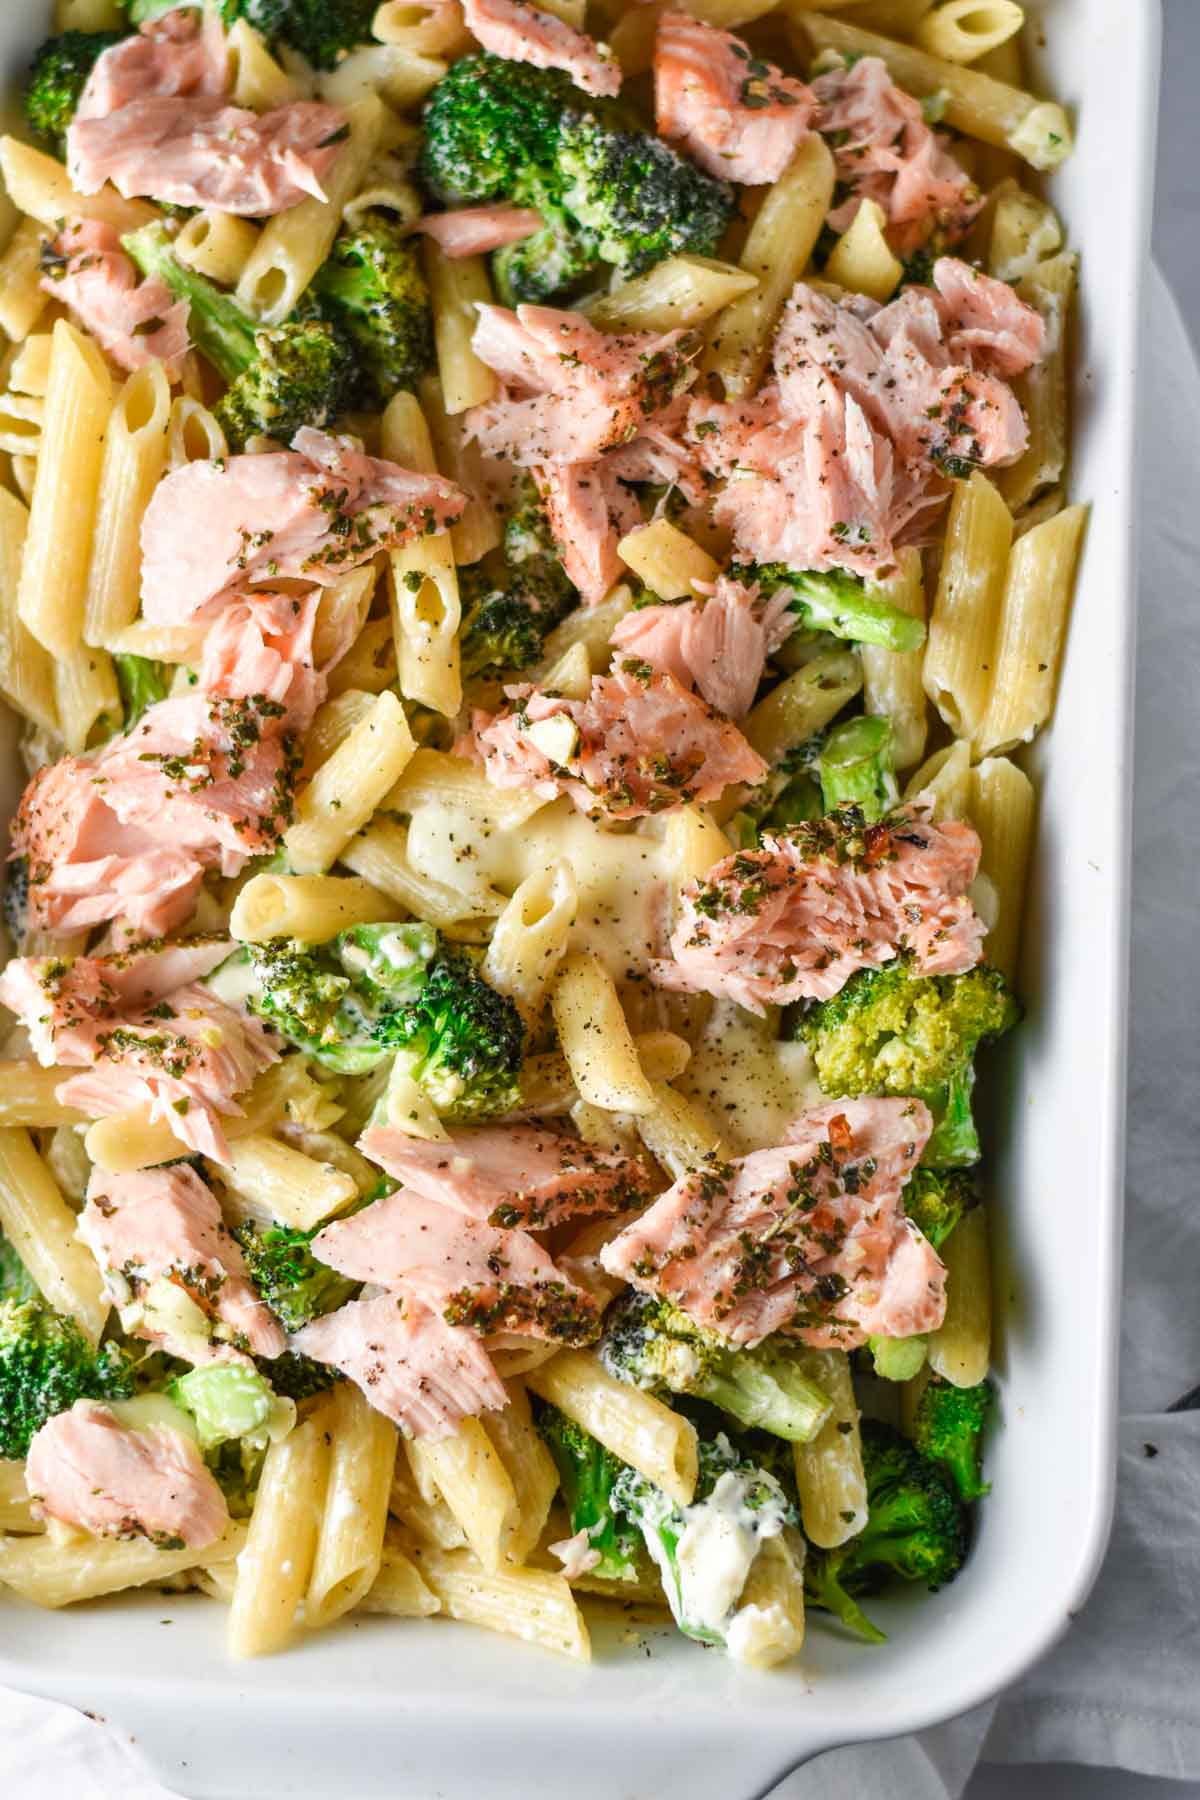 Roasted salmon with broccoli and pasta in a dish.